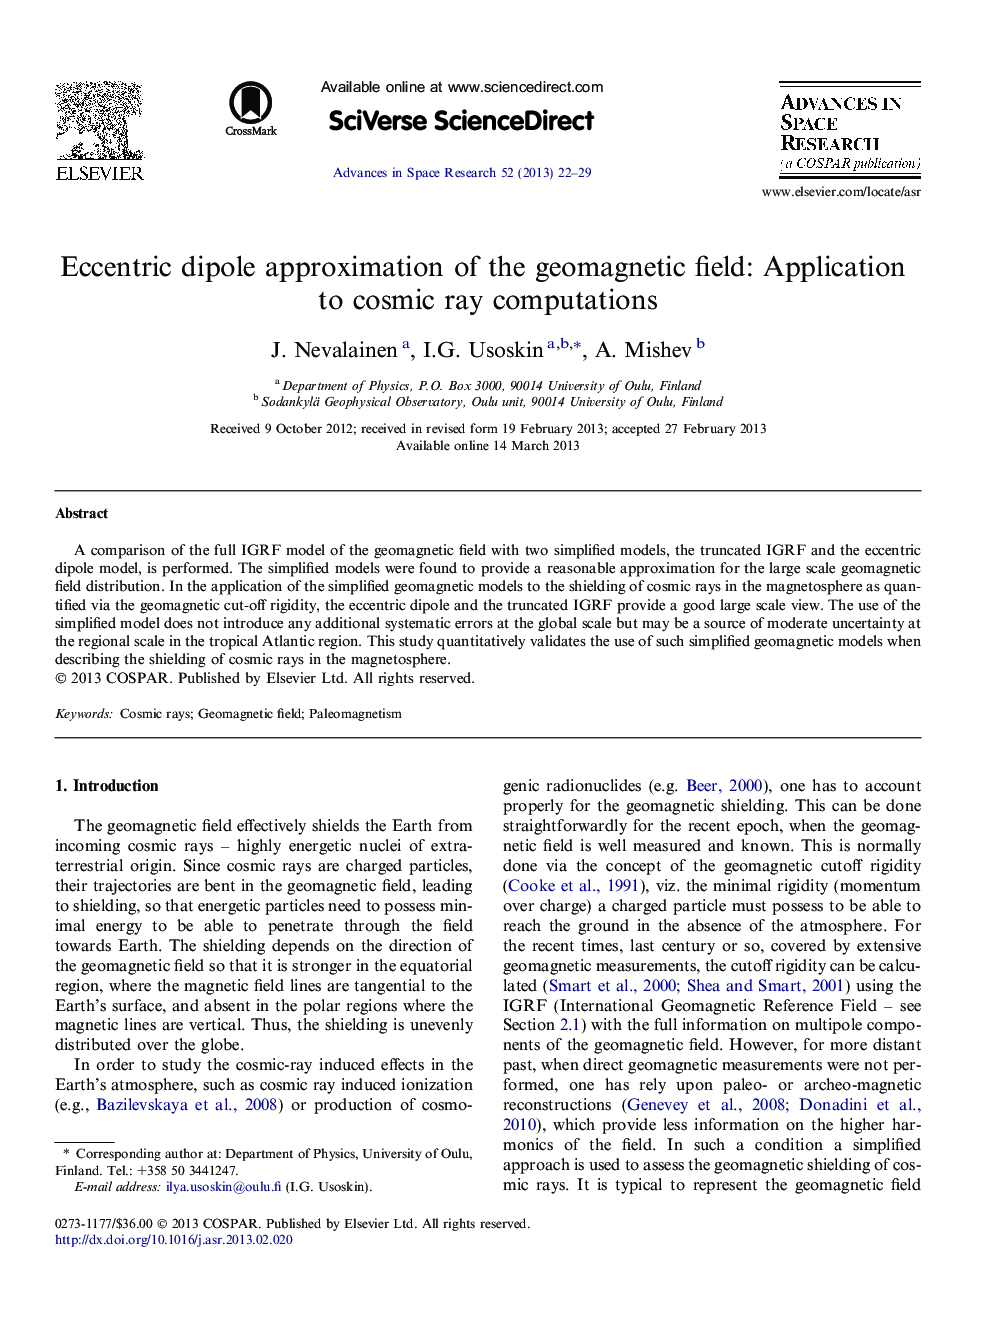 Eccentric dipole approximation of the geomagnetic field: Application to cosmic ray computations